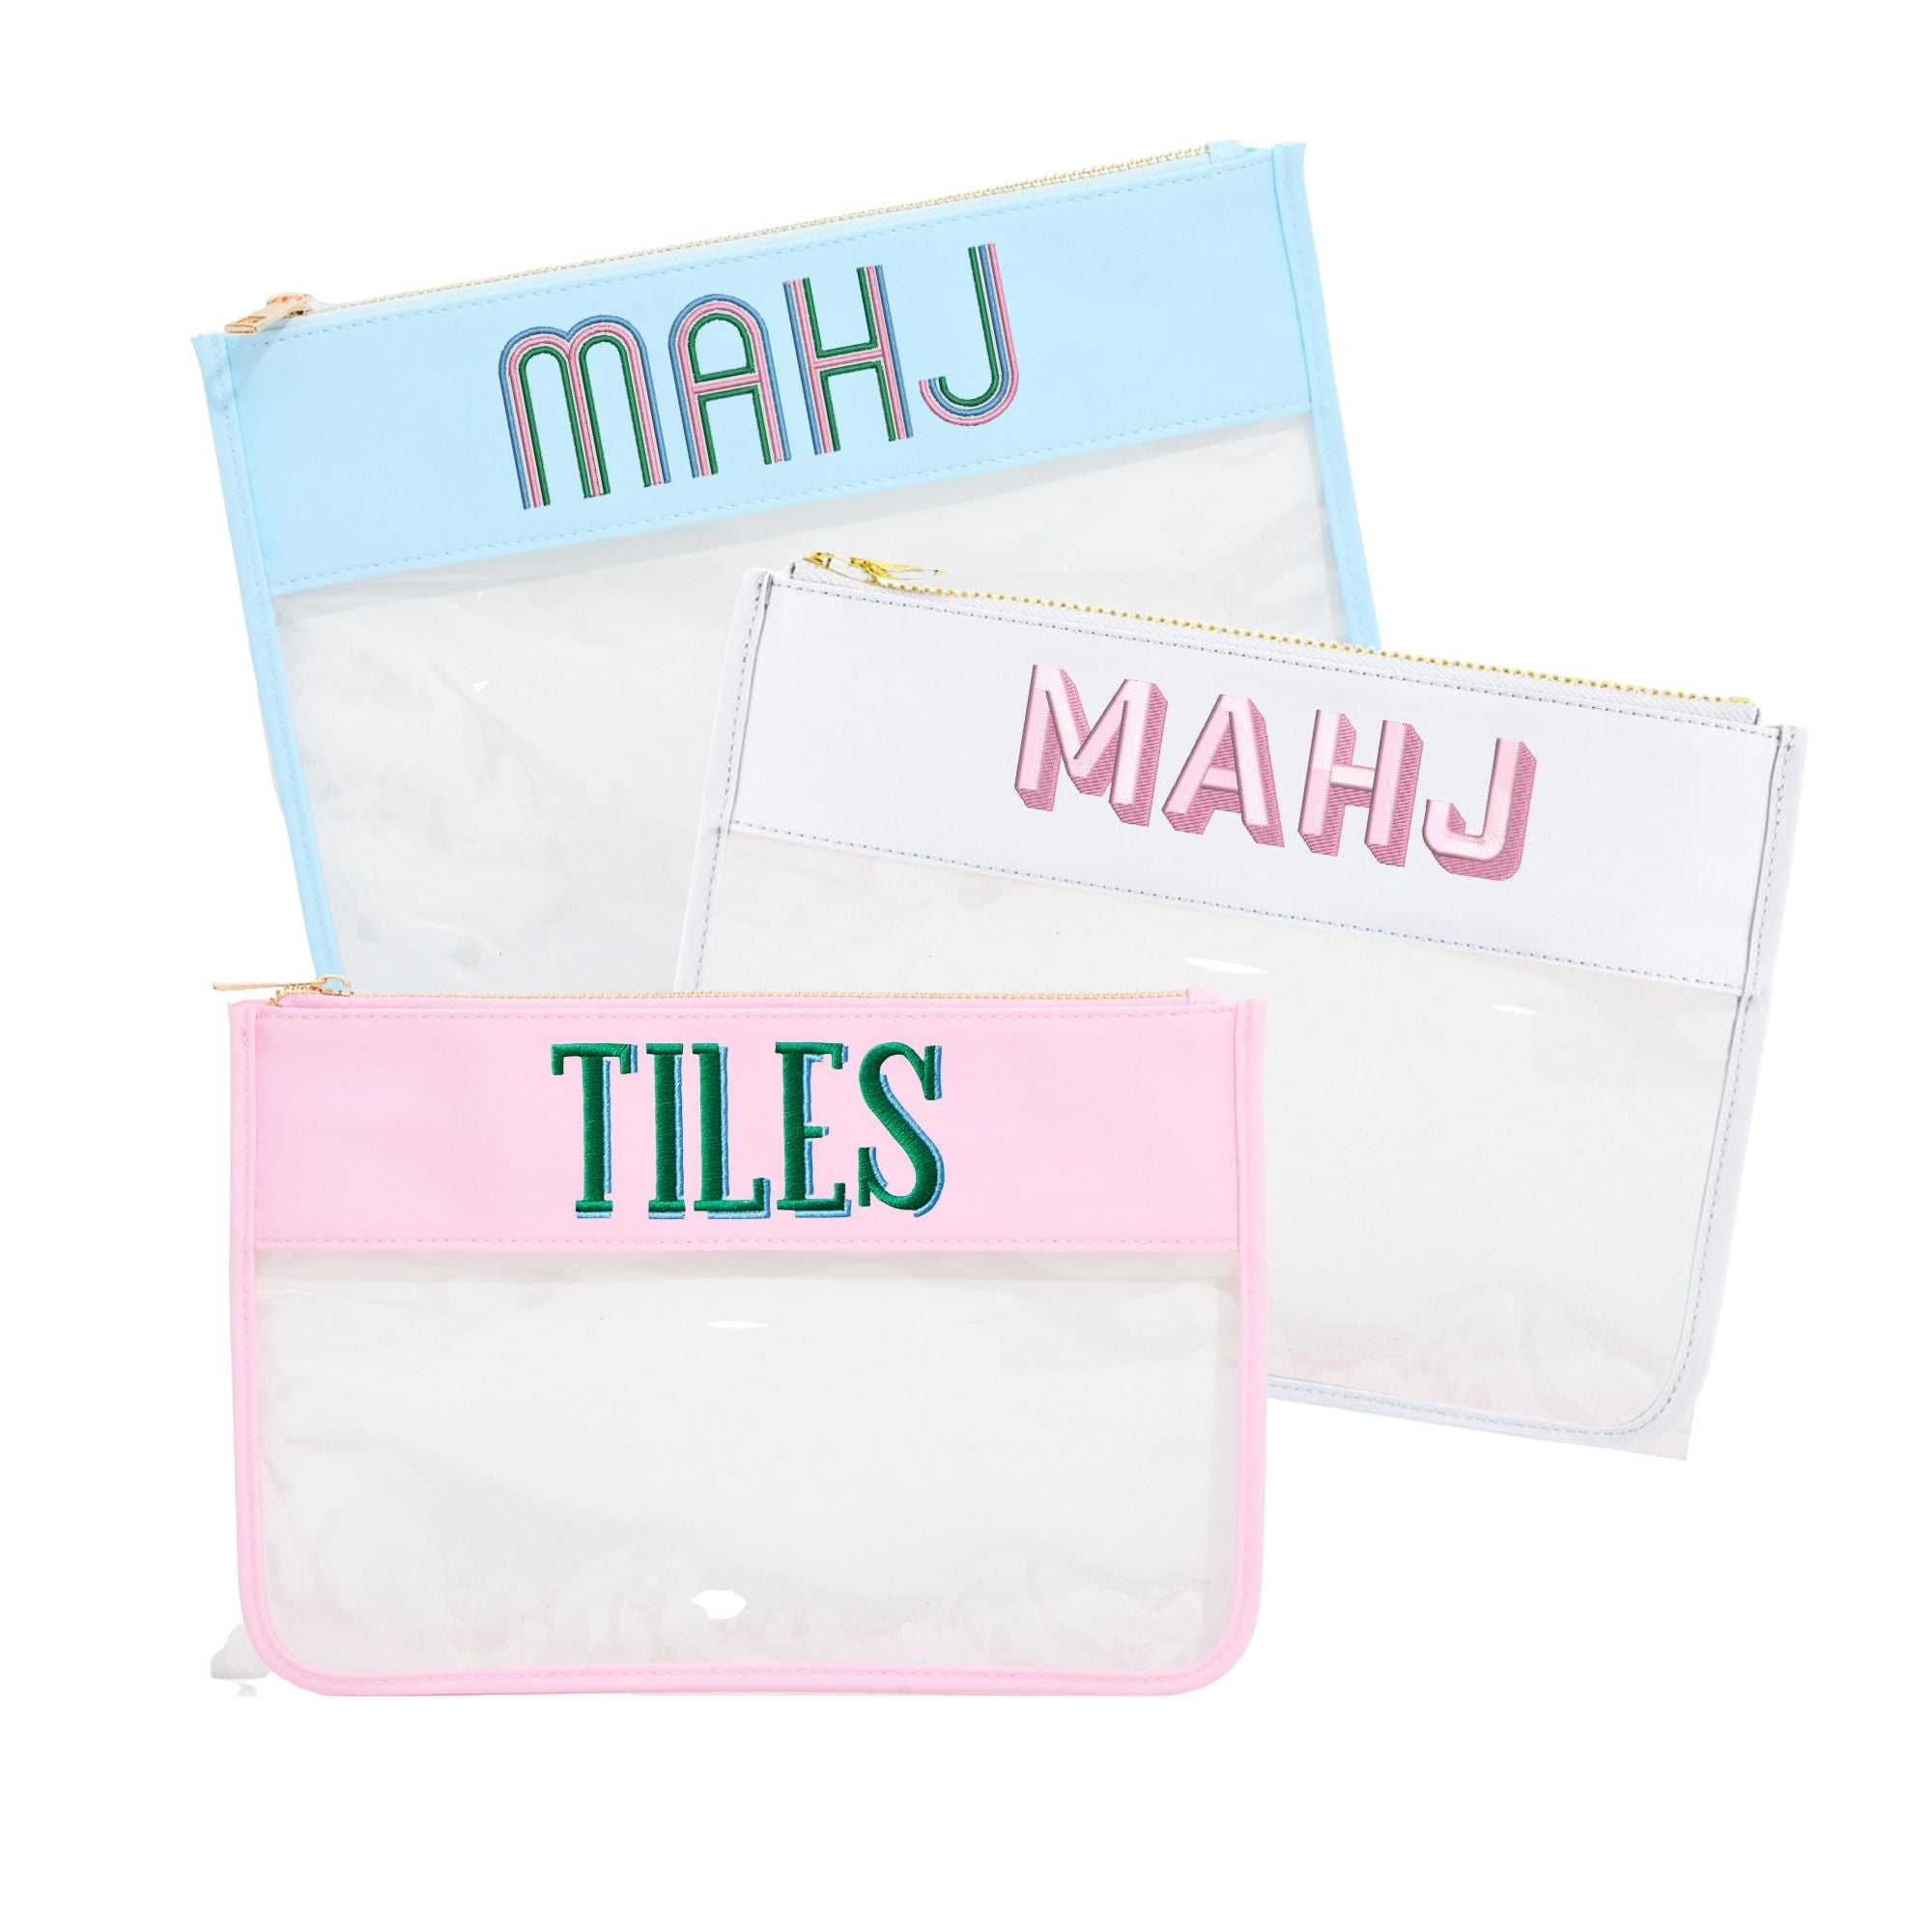 A white, pink, and blue nylon clear pouch are customized with mahjong designs